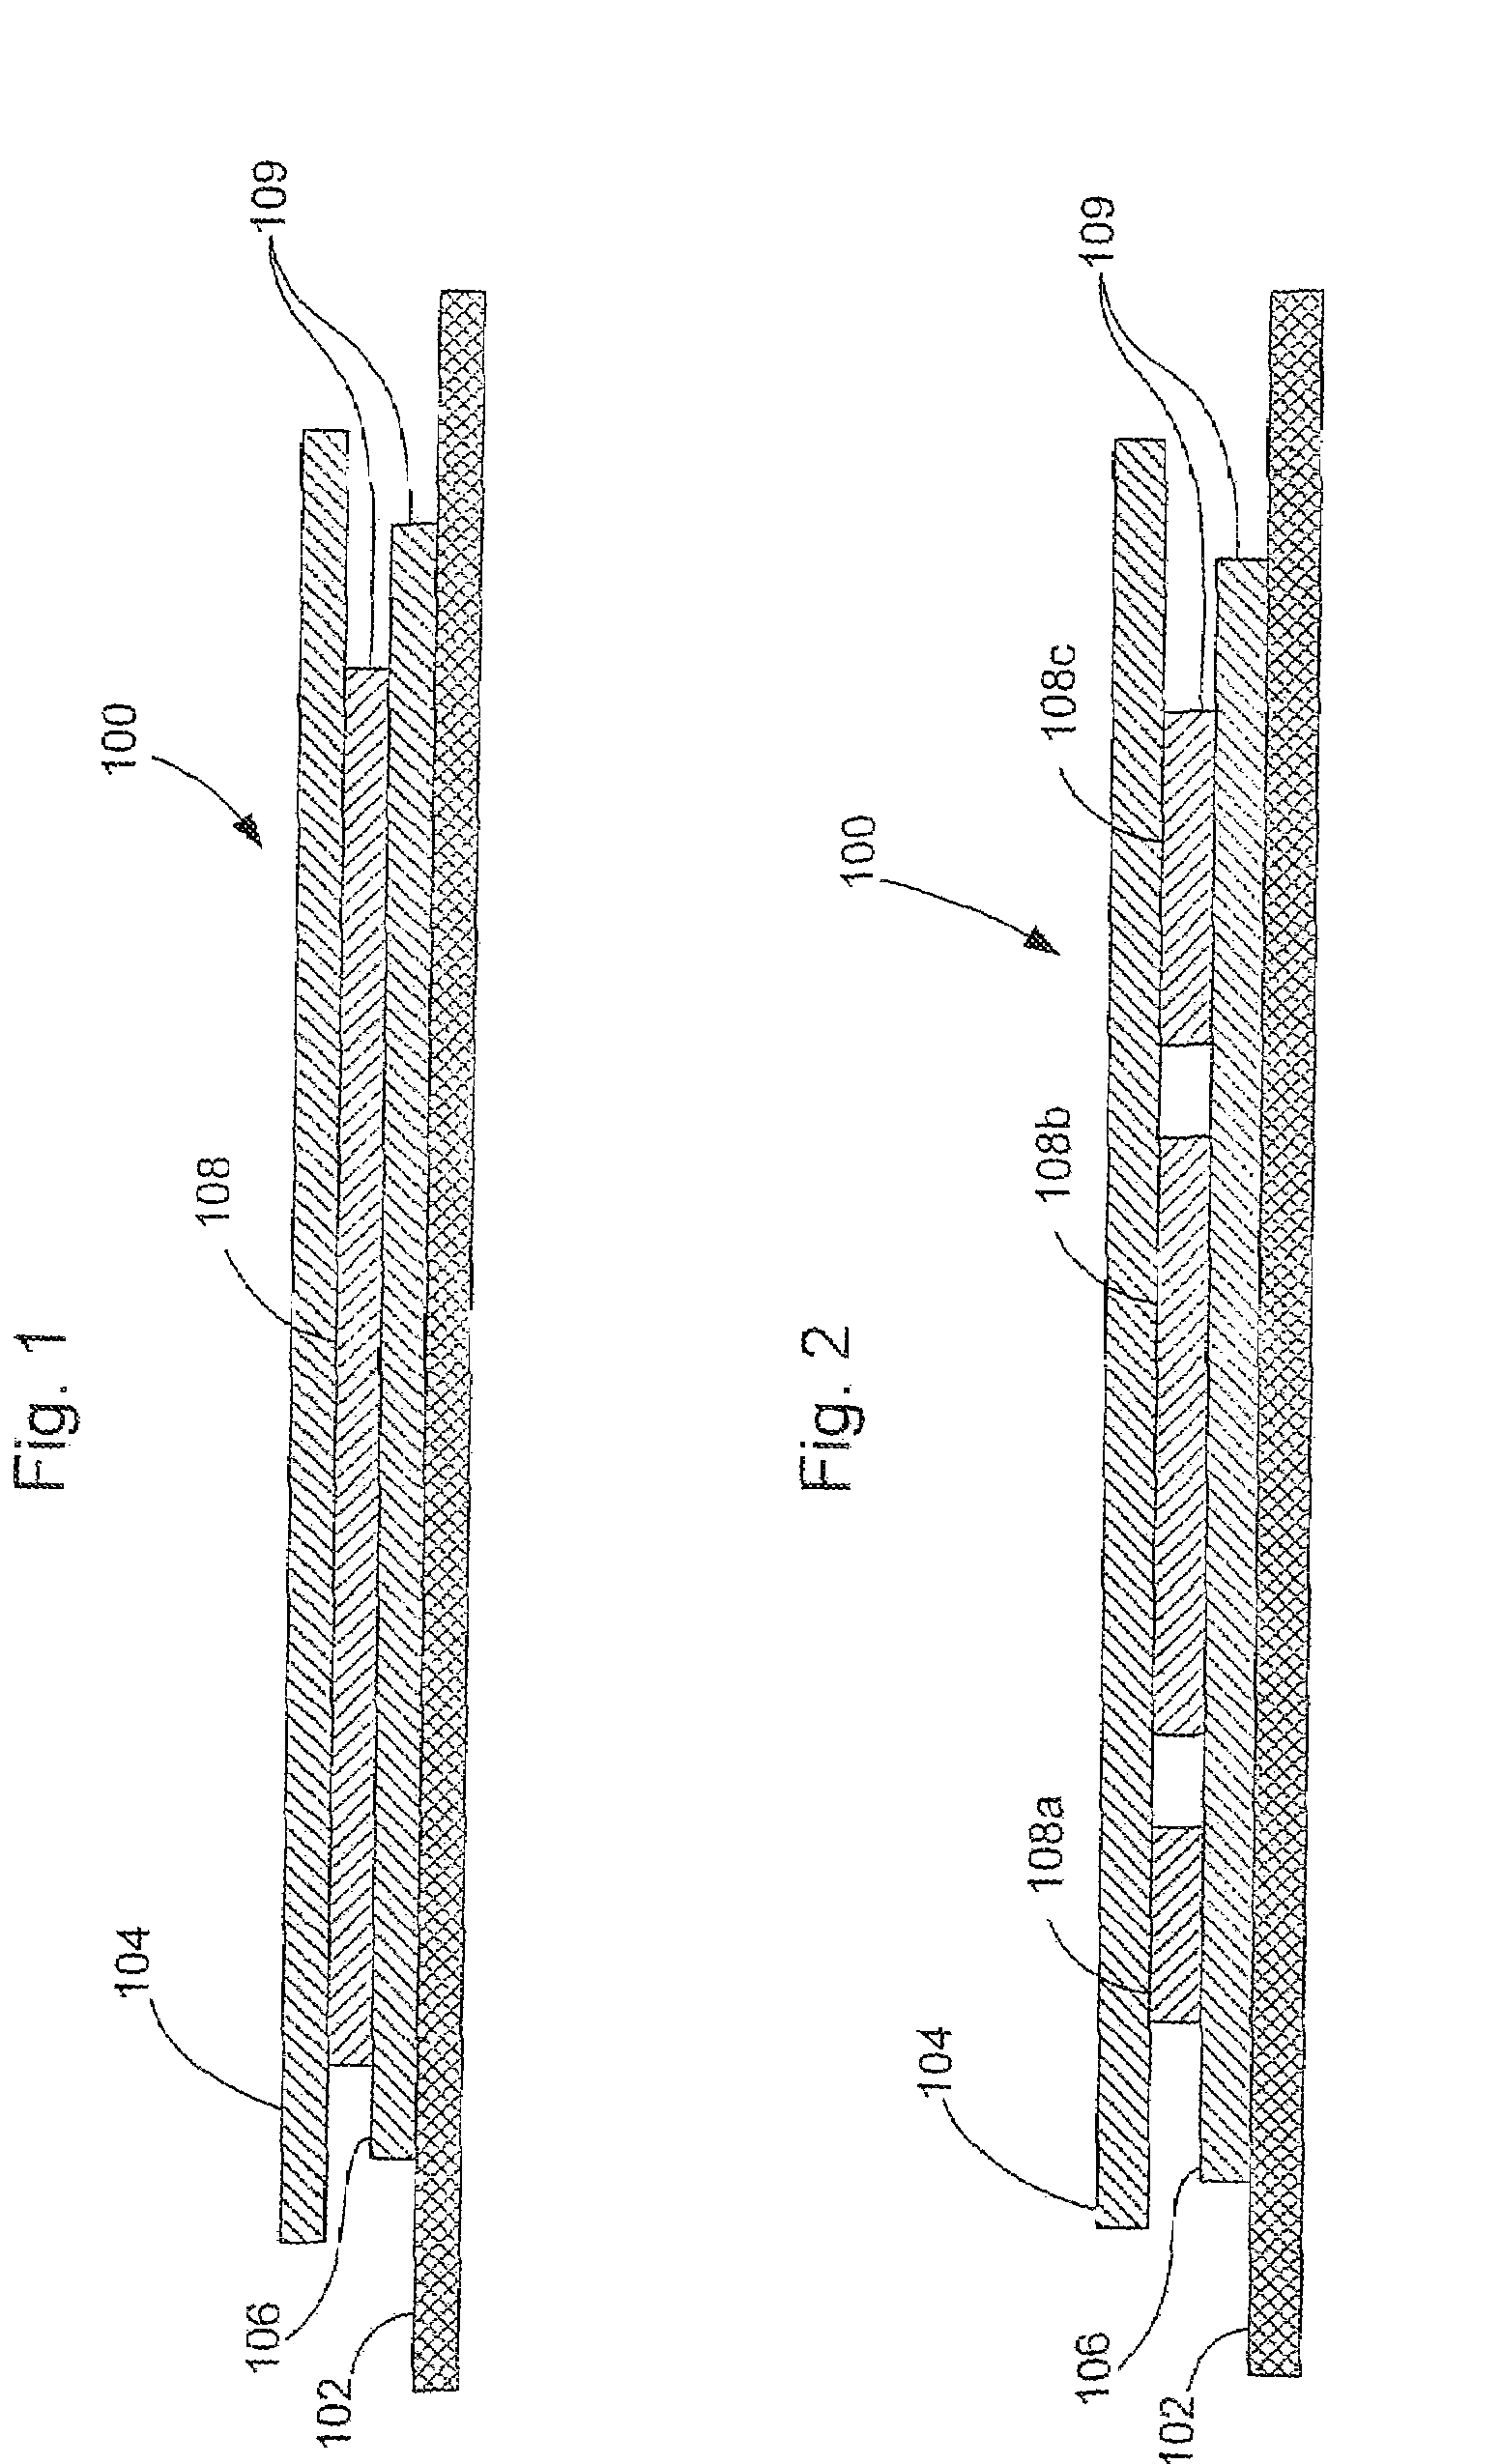 Thermally reactive ink transfer system